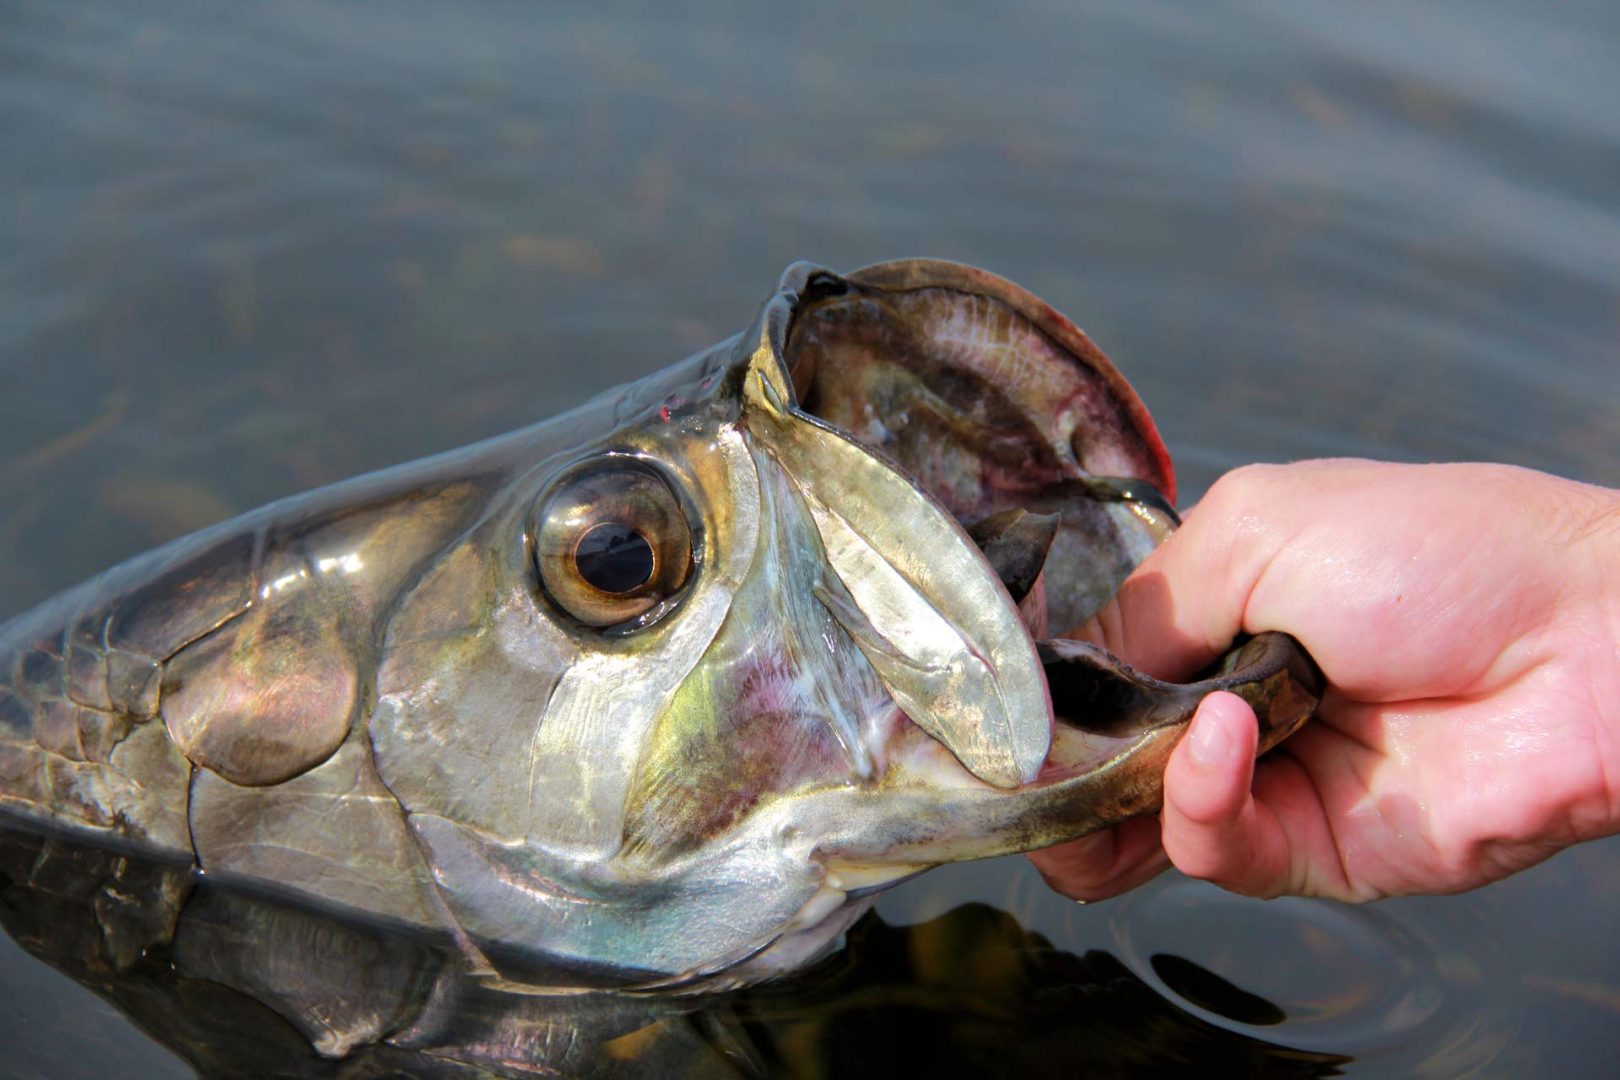 close up of tarpon being held by man's hand